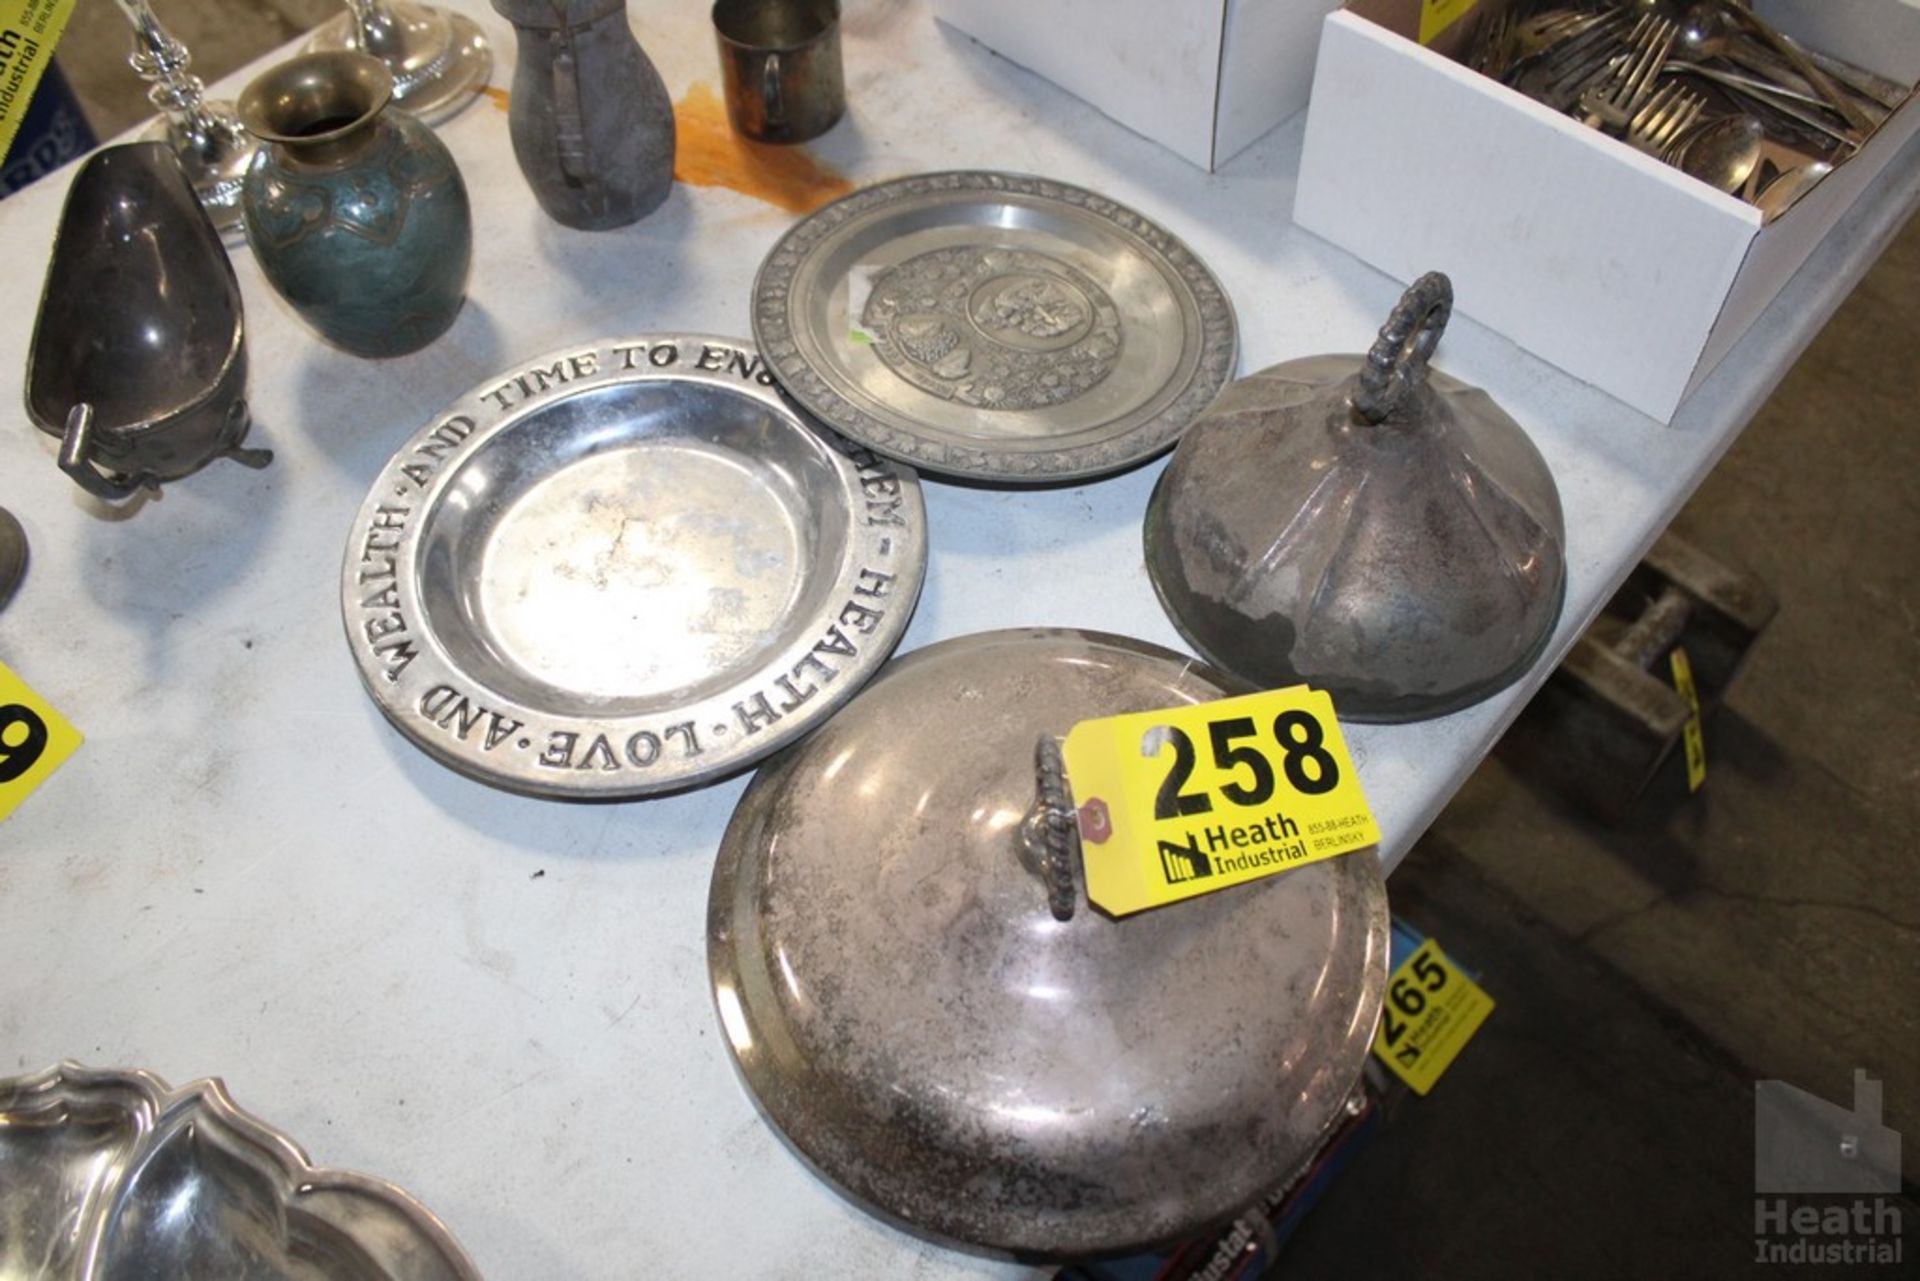 (2) LIDS AND TWO PLATES. LIDS MAY CONTAIN SILVER, NO CLEAR MARKINGS